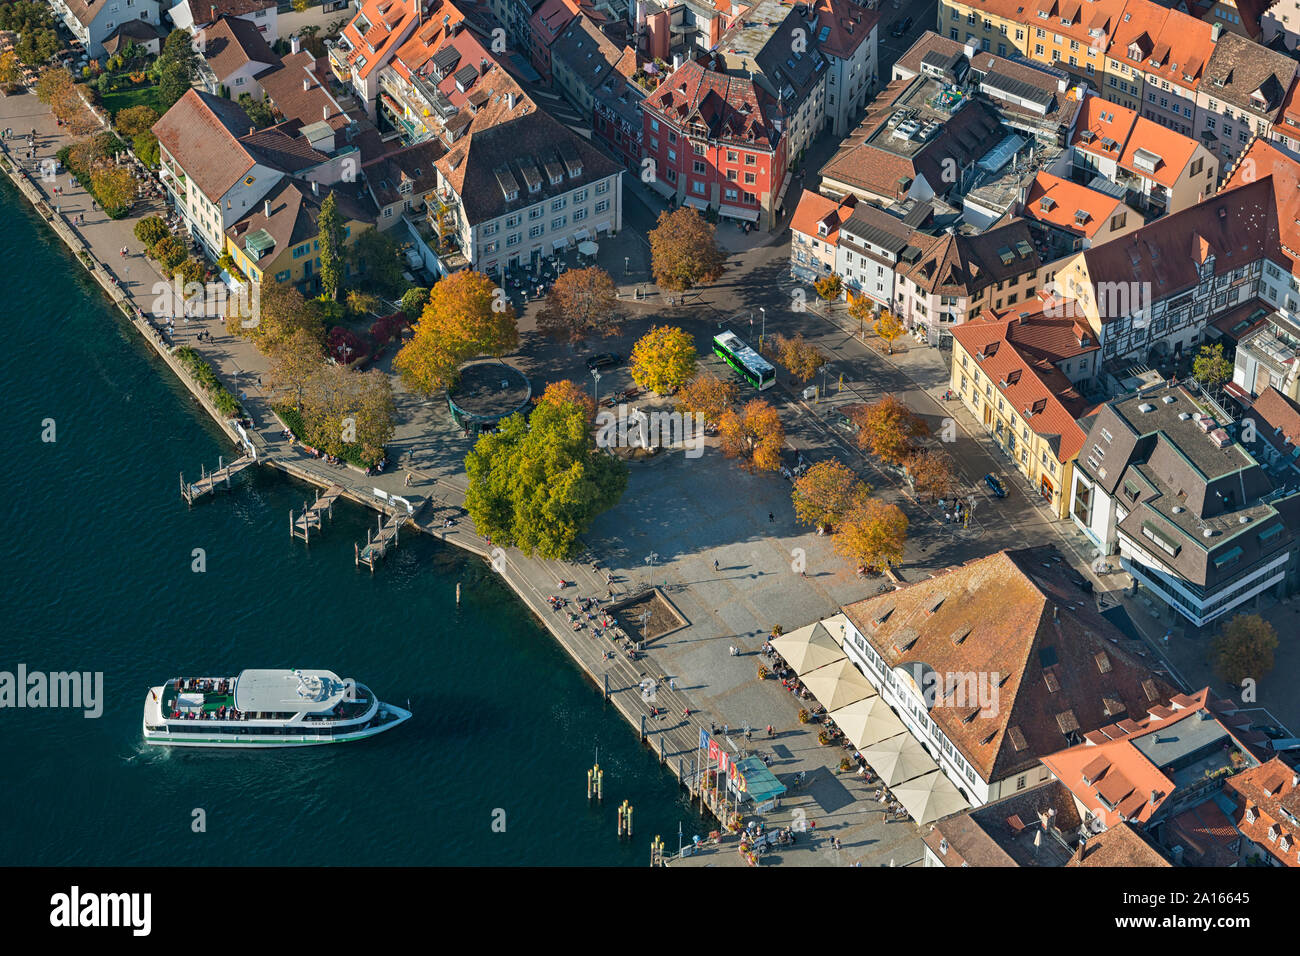 Germany, Baden-Wurttemberg, Uberlingen, Aerial view of Lake Constance and old town Stock Photo